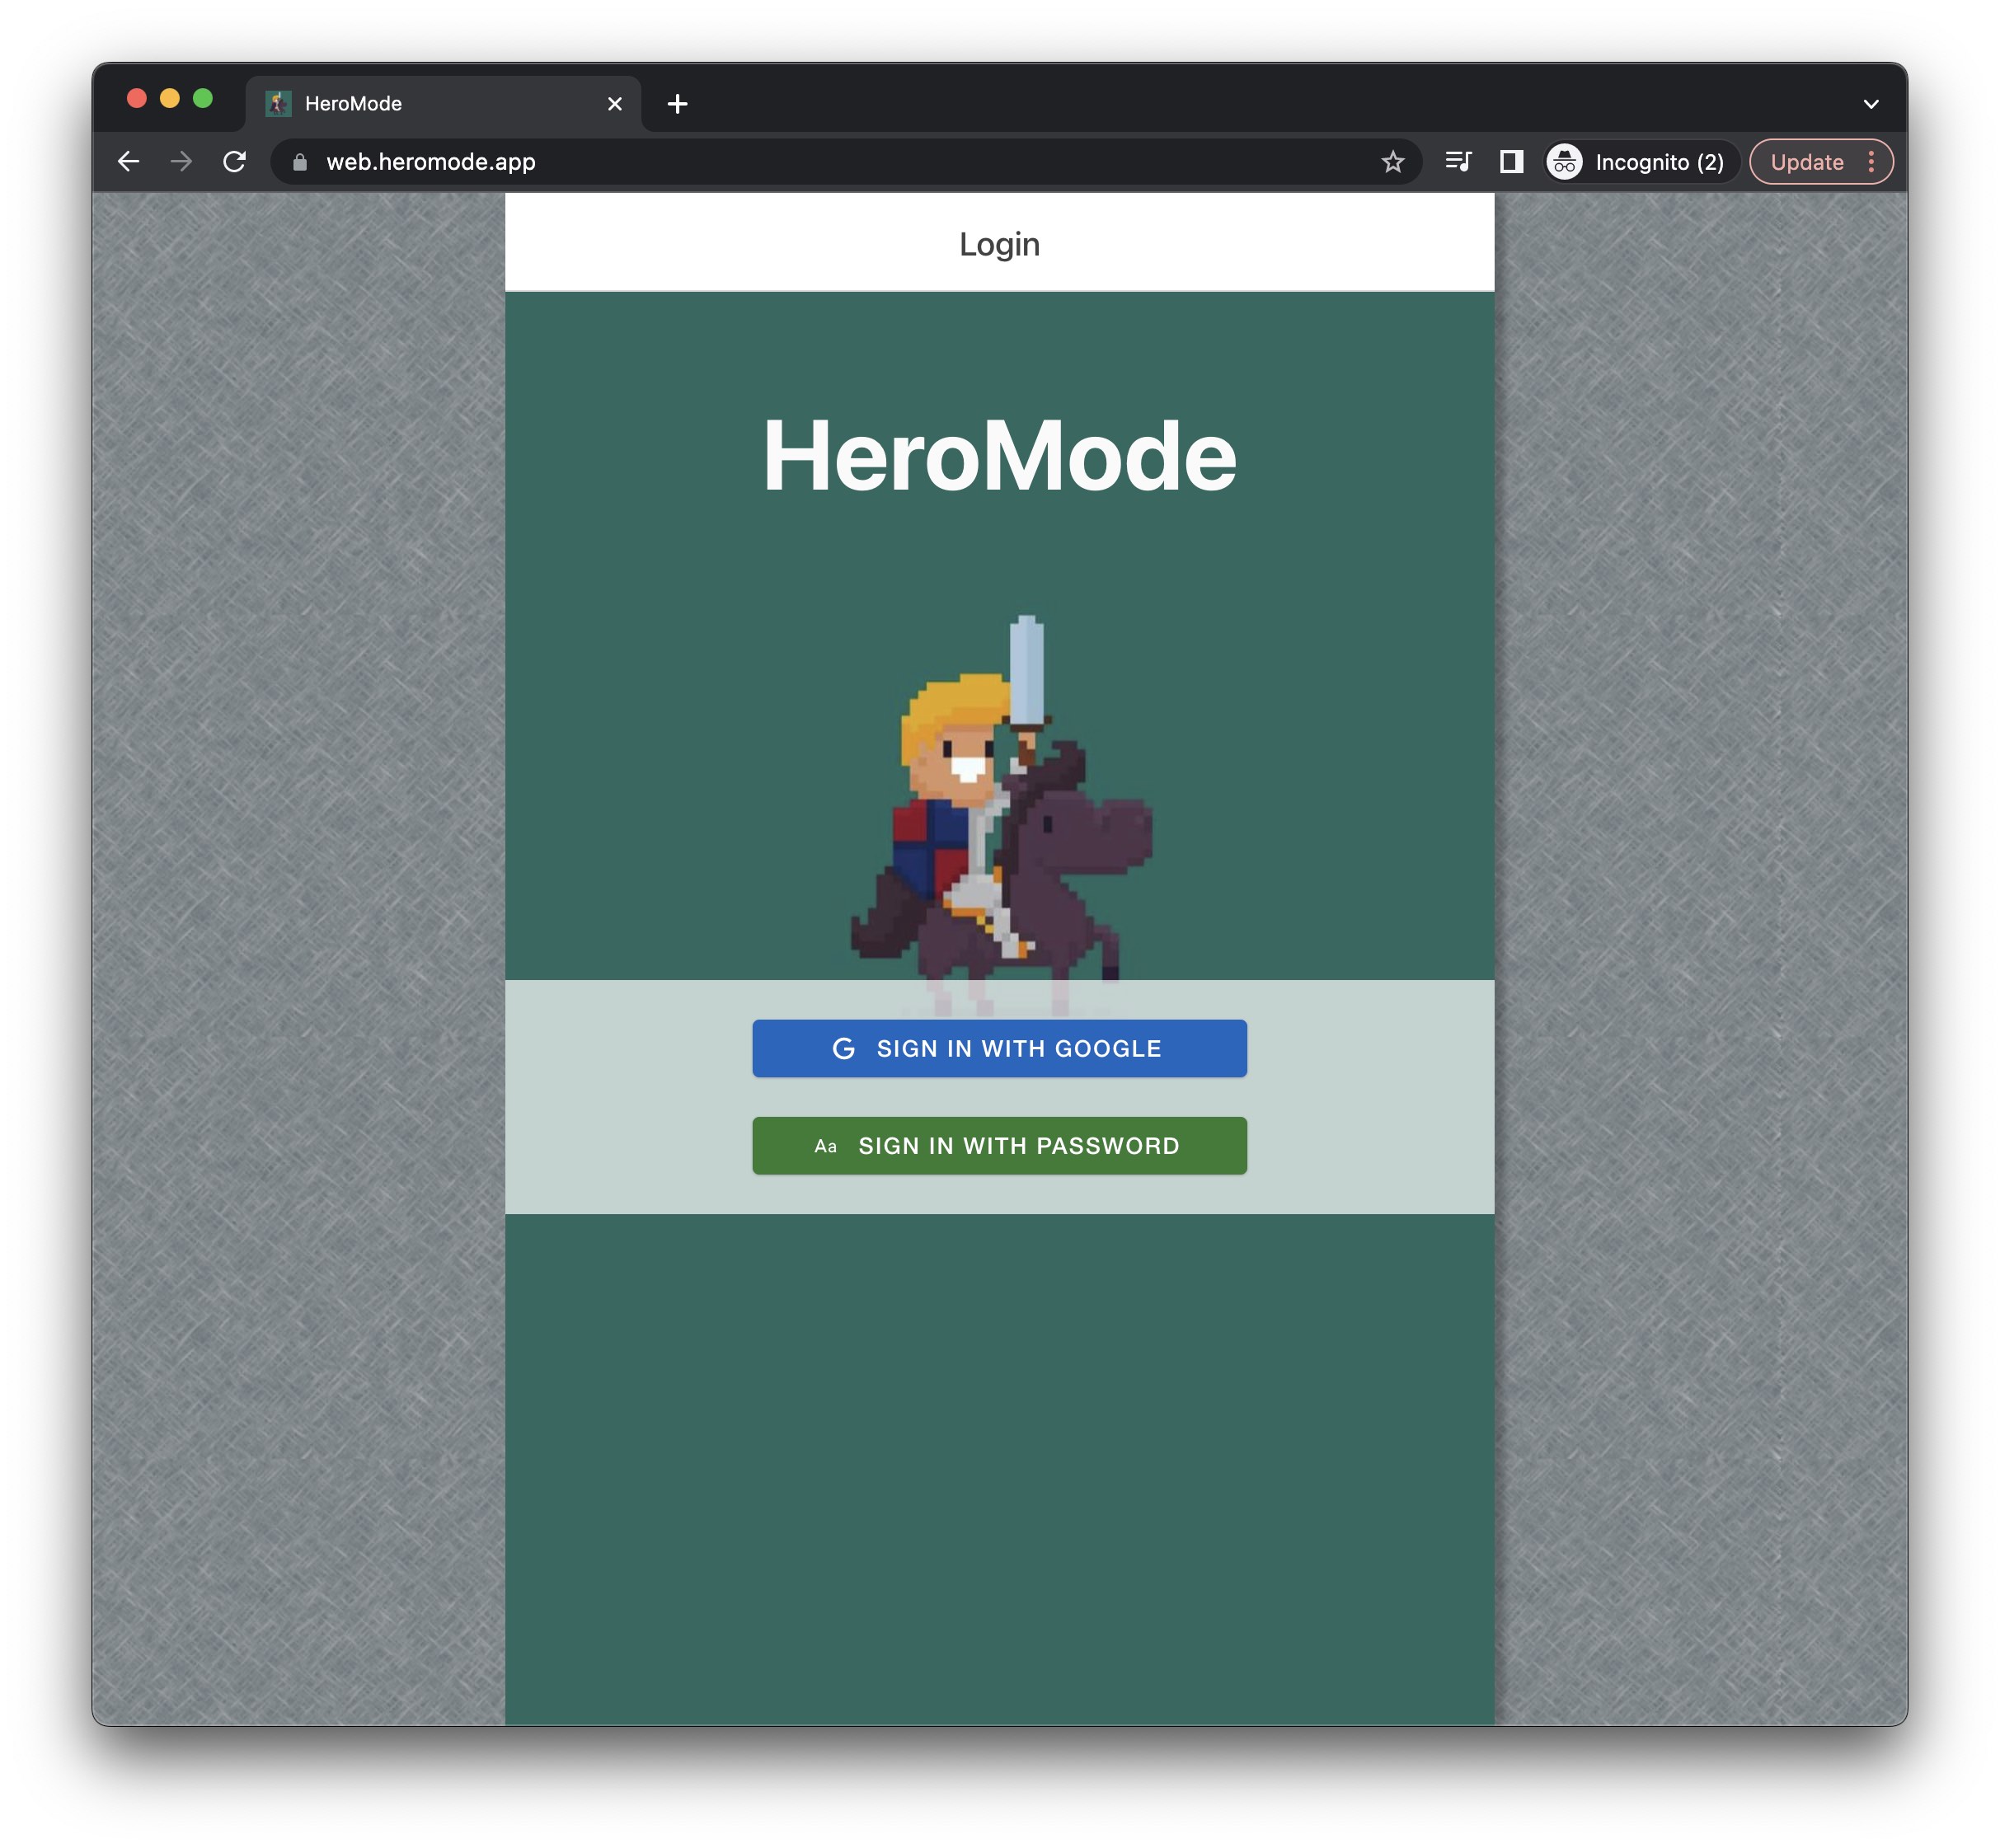 You can now use HeroMode as a web app.